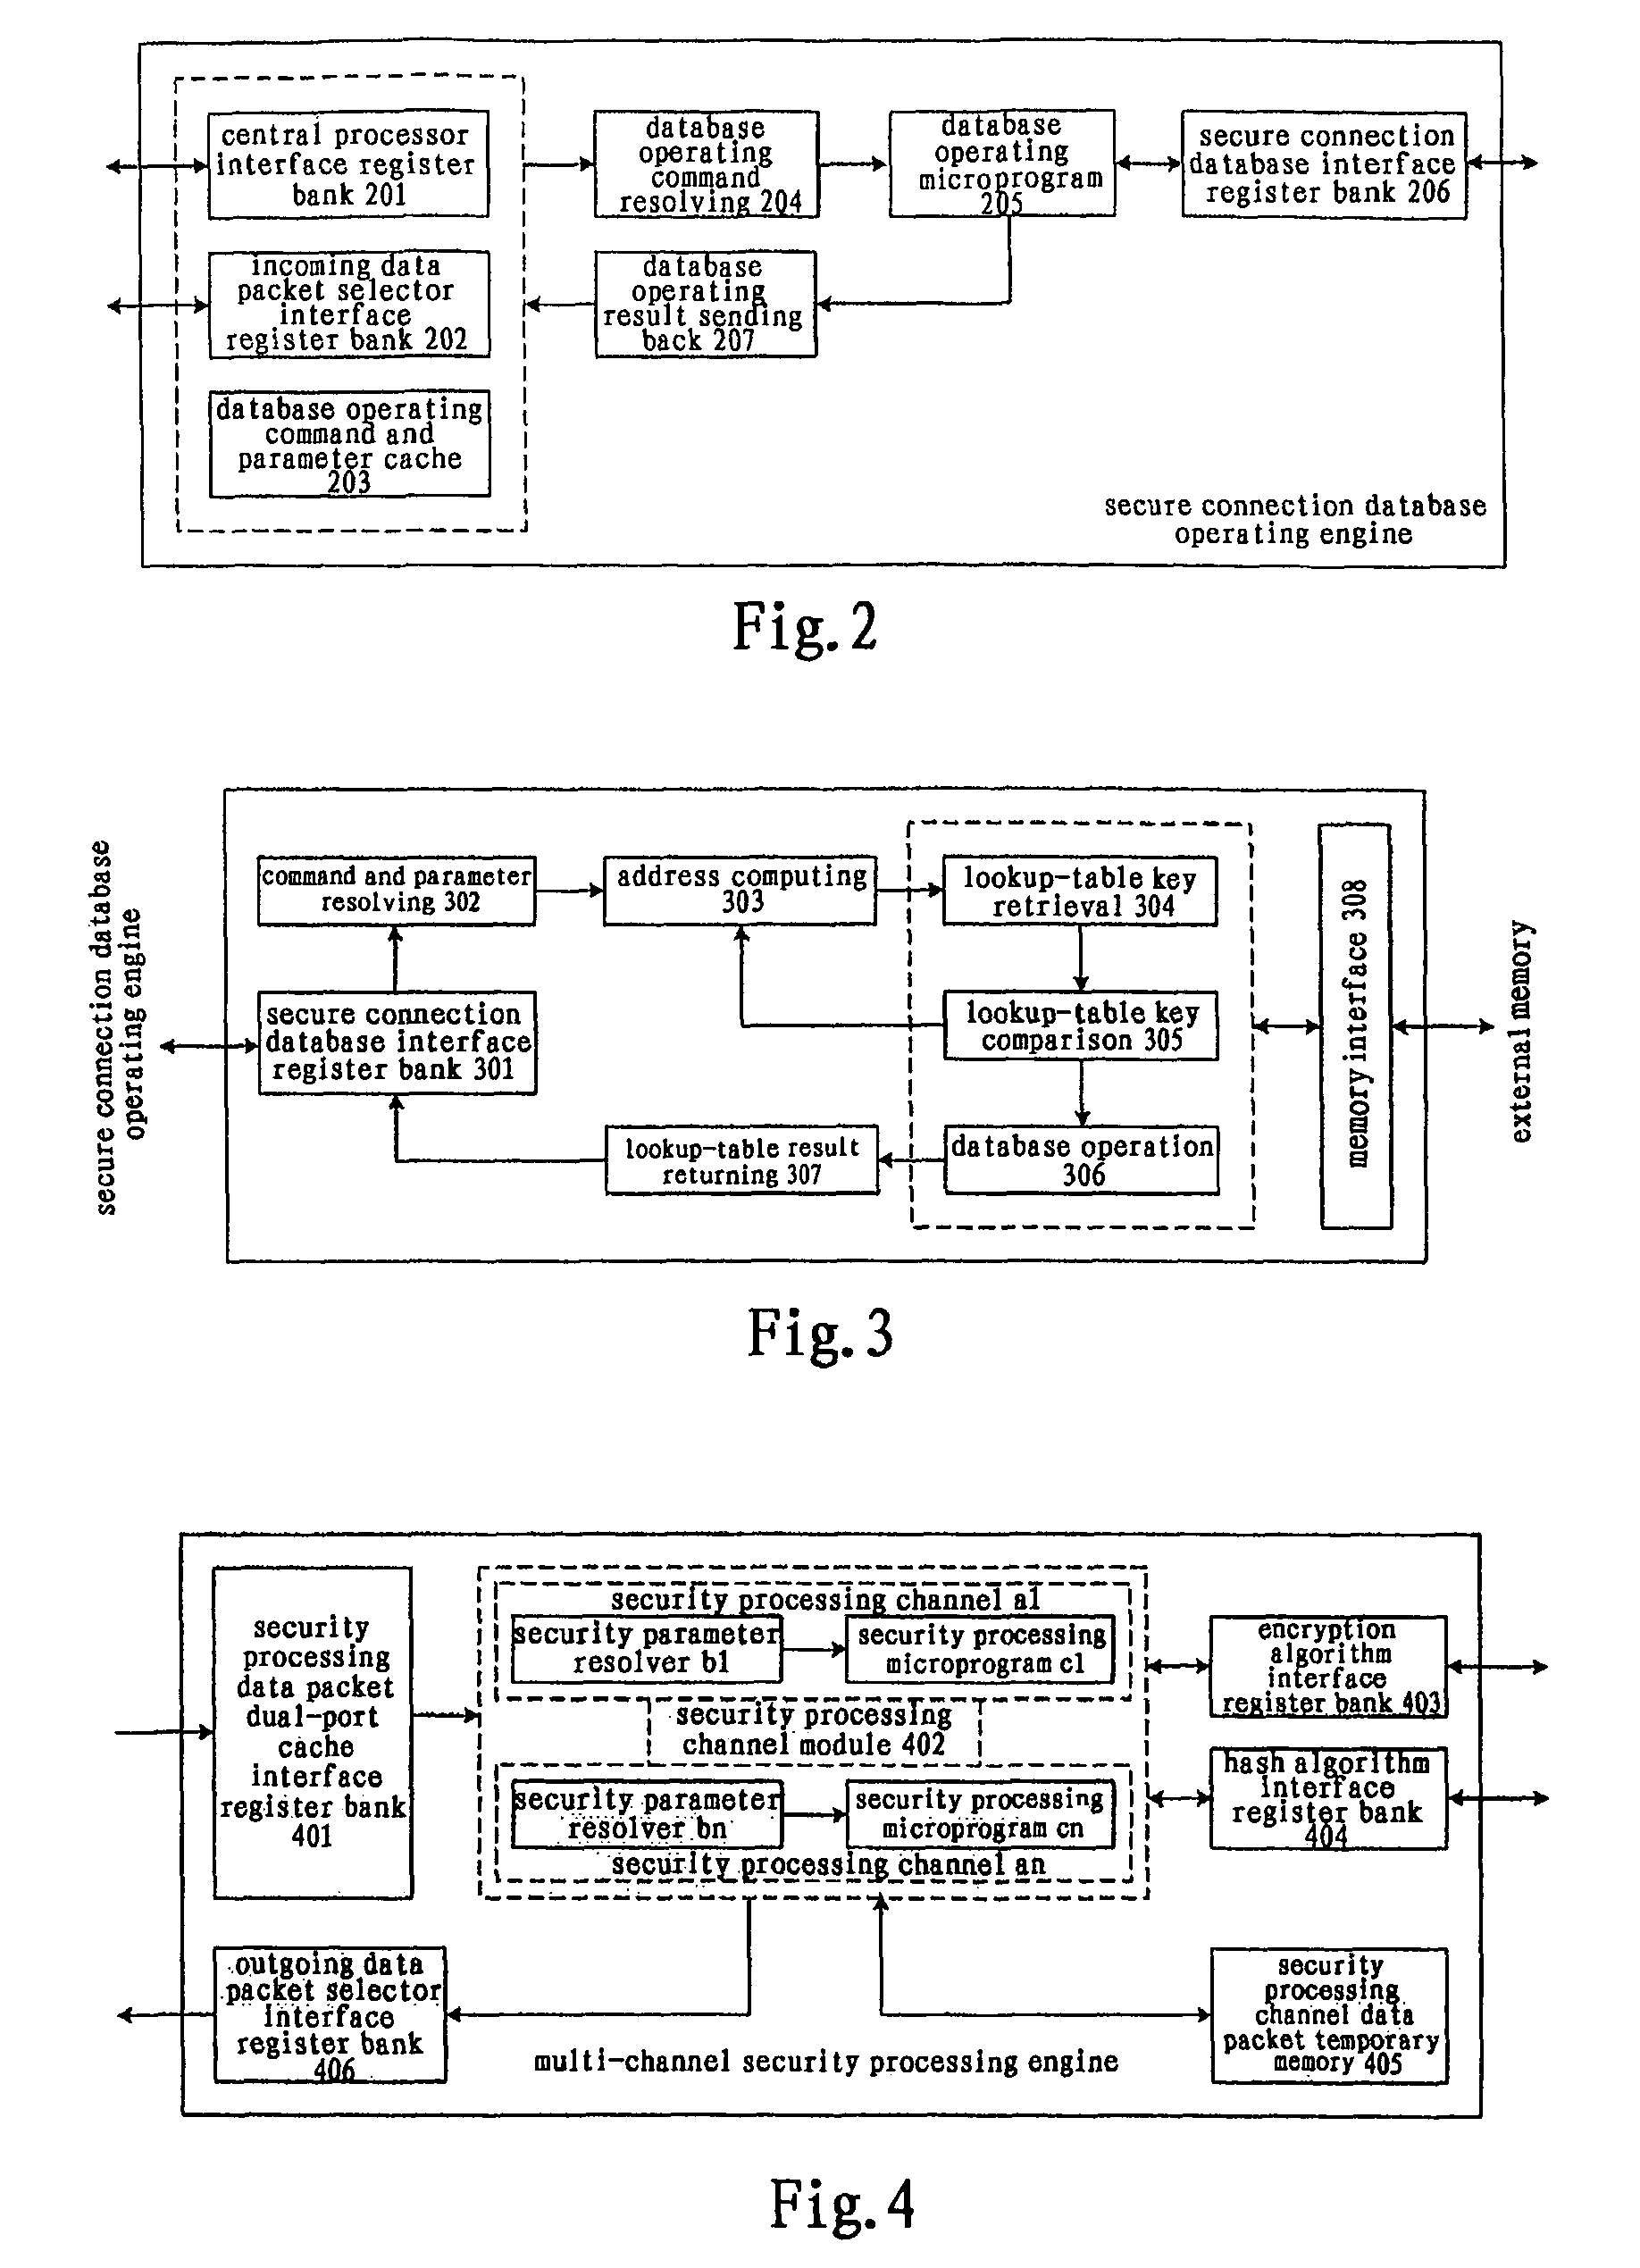 Network communication security processor and data processing method